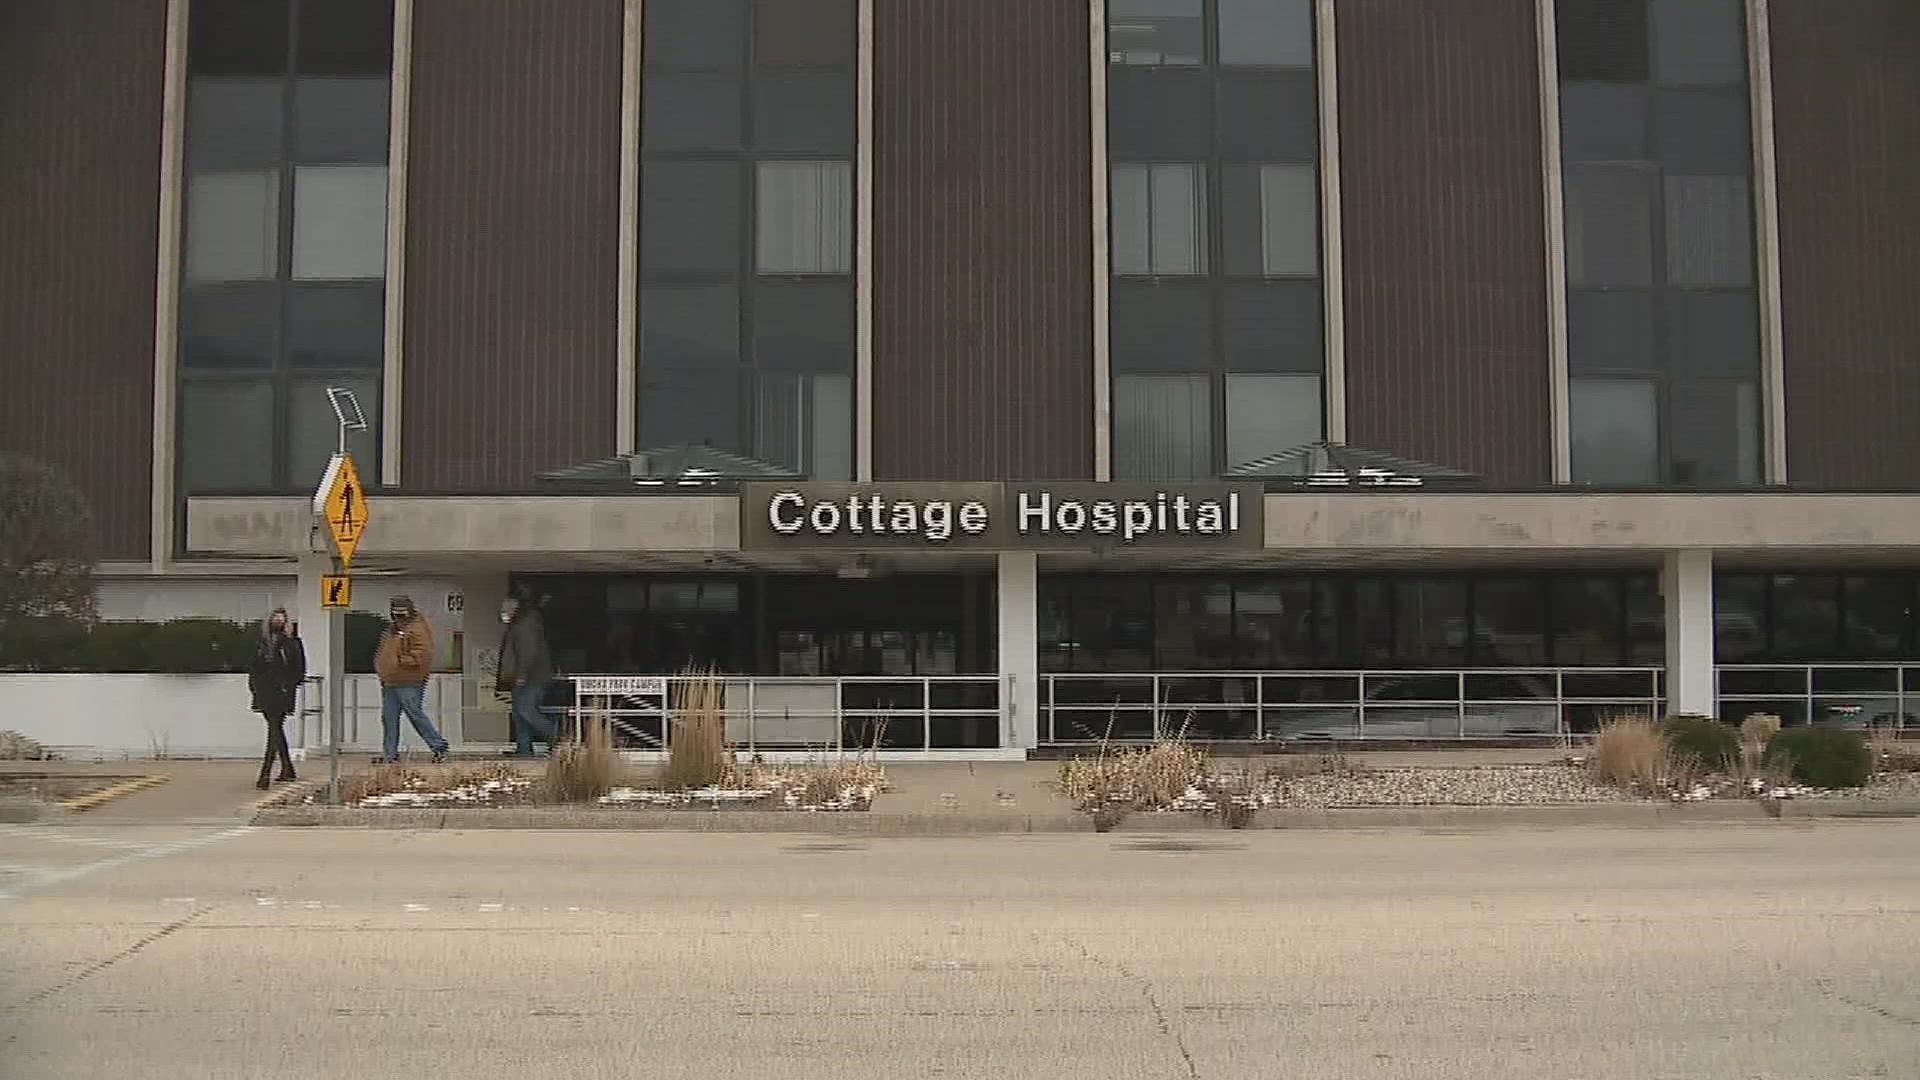 In a letter sent out to staff, the owner of both the clinics and Cottage Hospital said the clinics would remain open and operational.